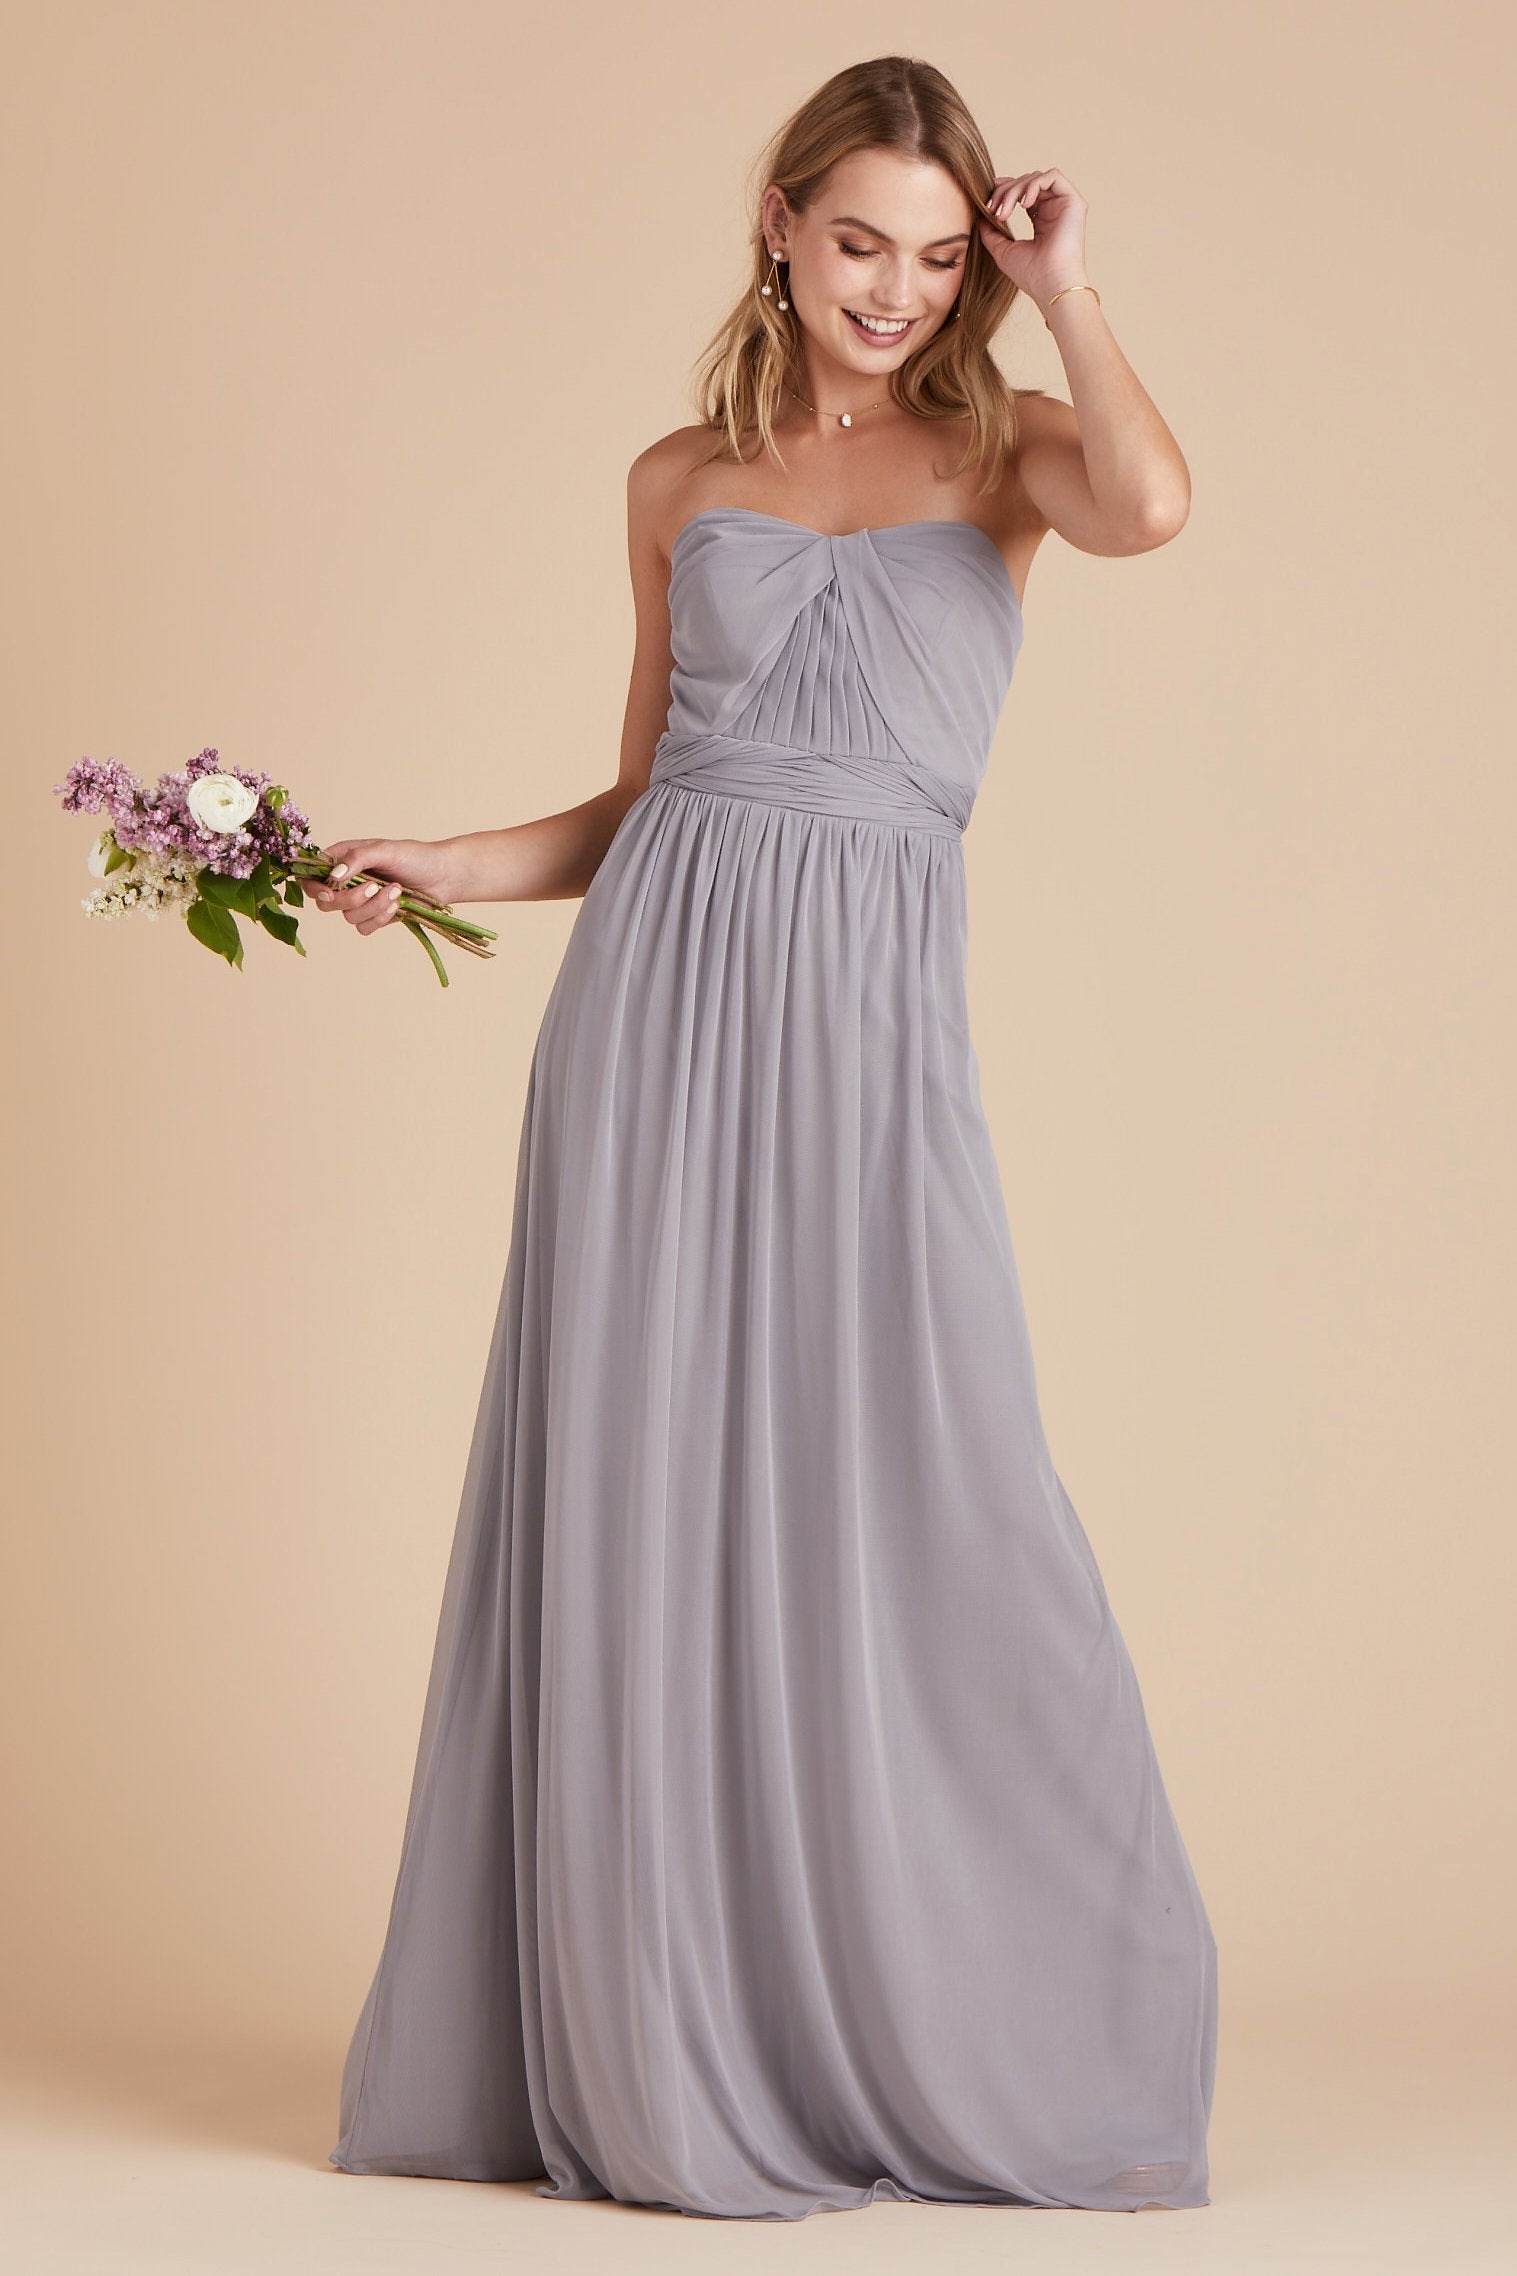 Chicky convertible bridesmaid dress in silver mesh by Birdy Grey, front view